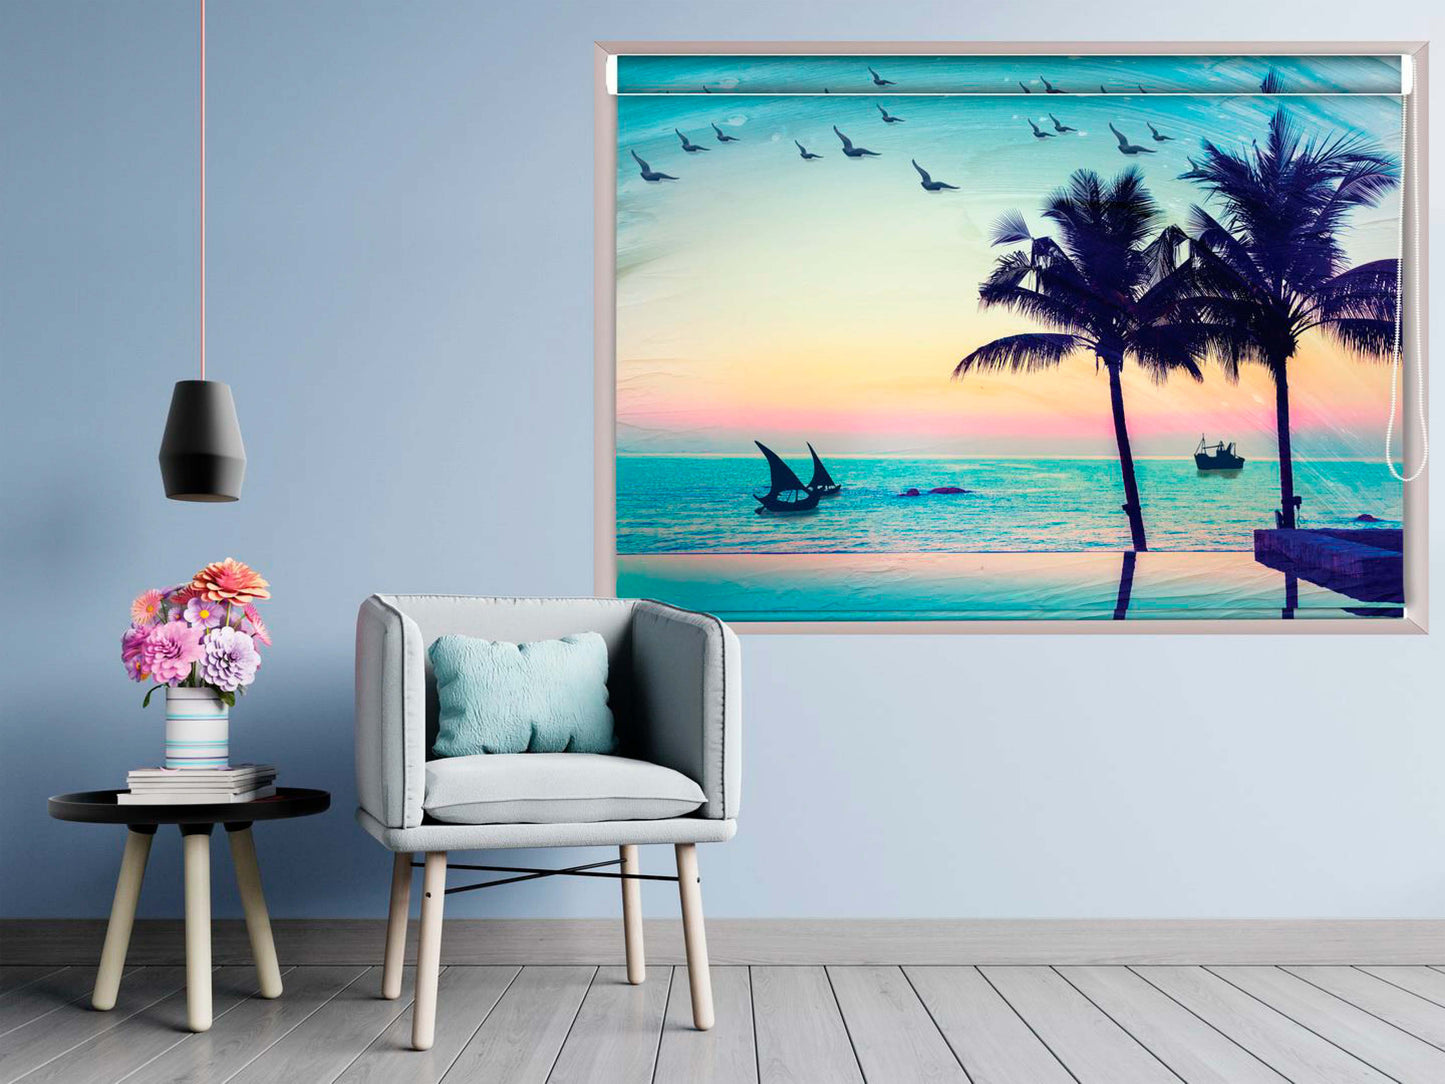 Blackout Roller Blinds for Window Beach Scenery Design (36-(W) X 36-(H)